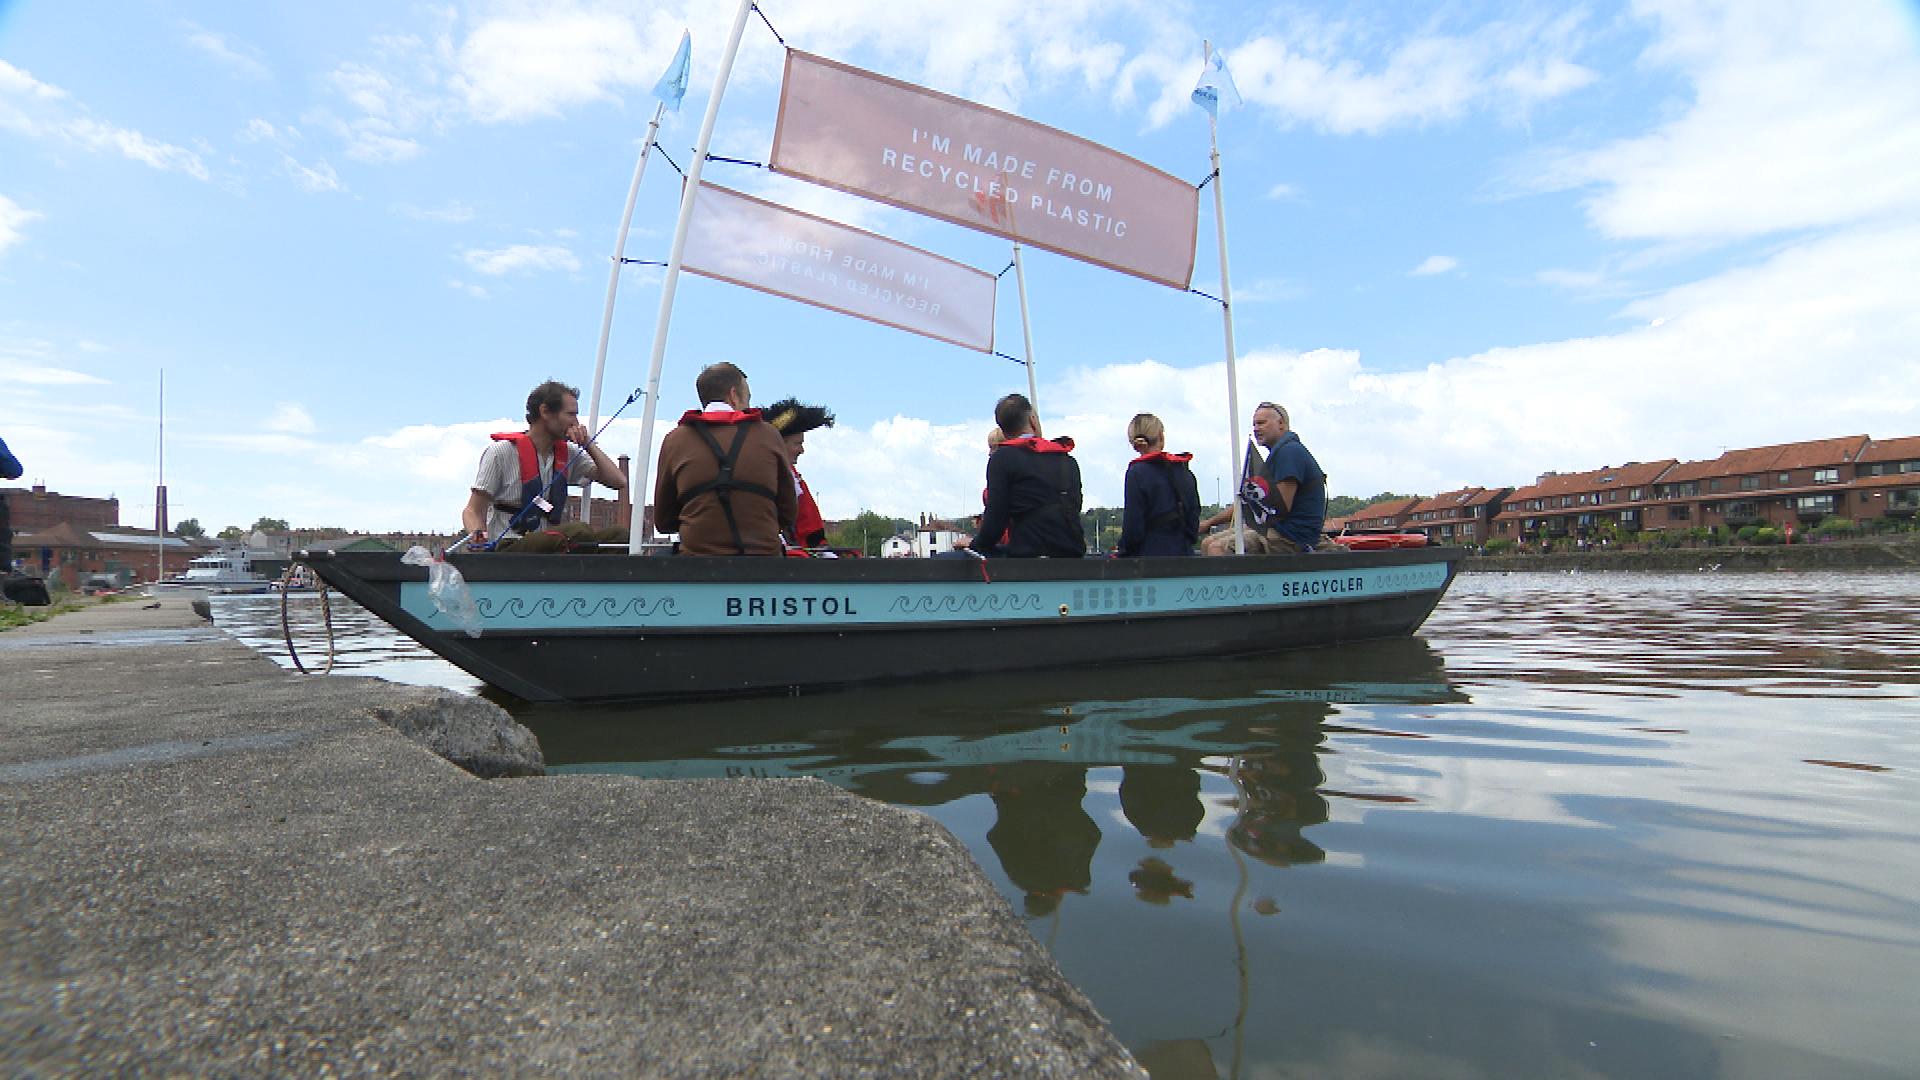 The boat made from recycled plastic that fishes rubbish out of the water